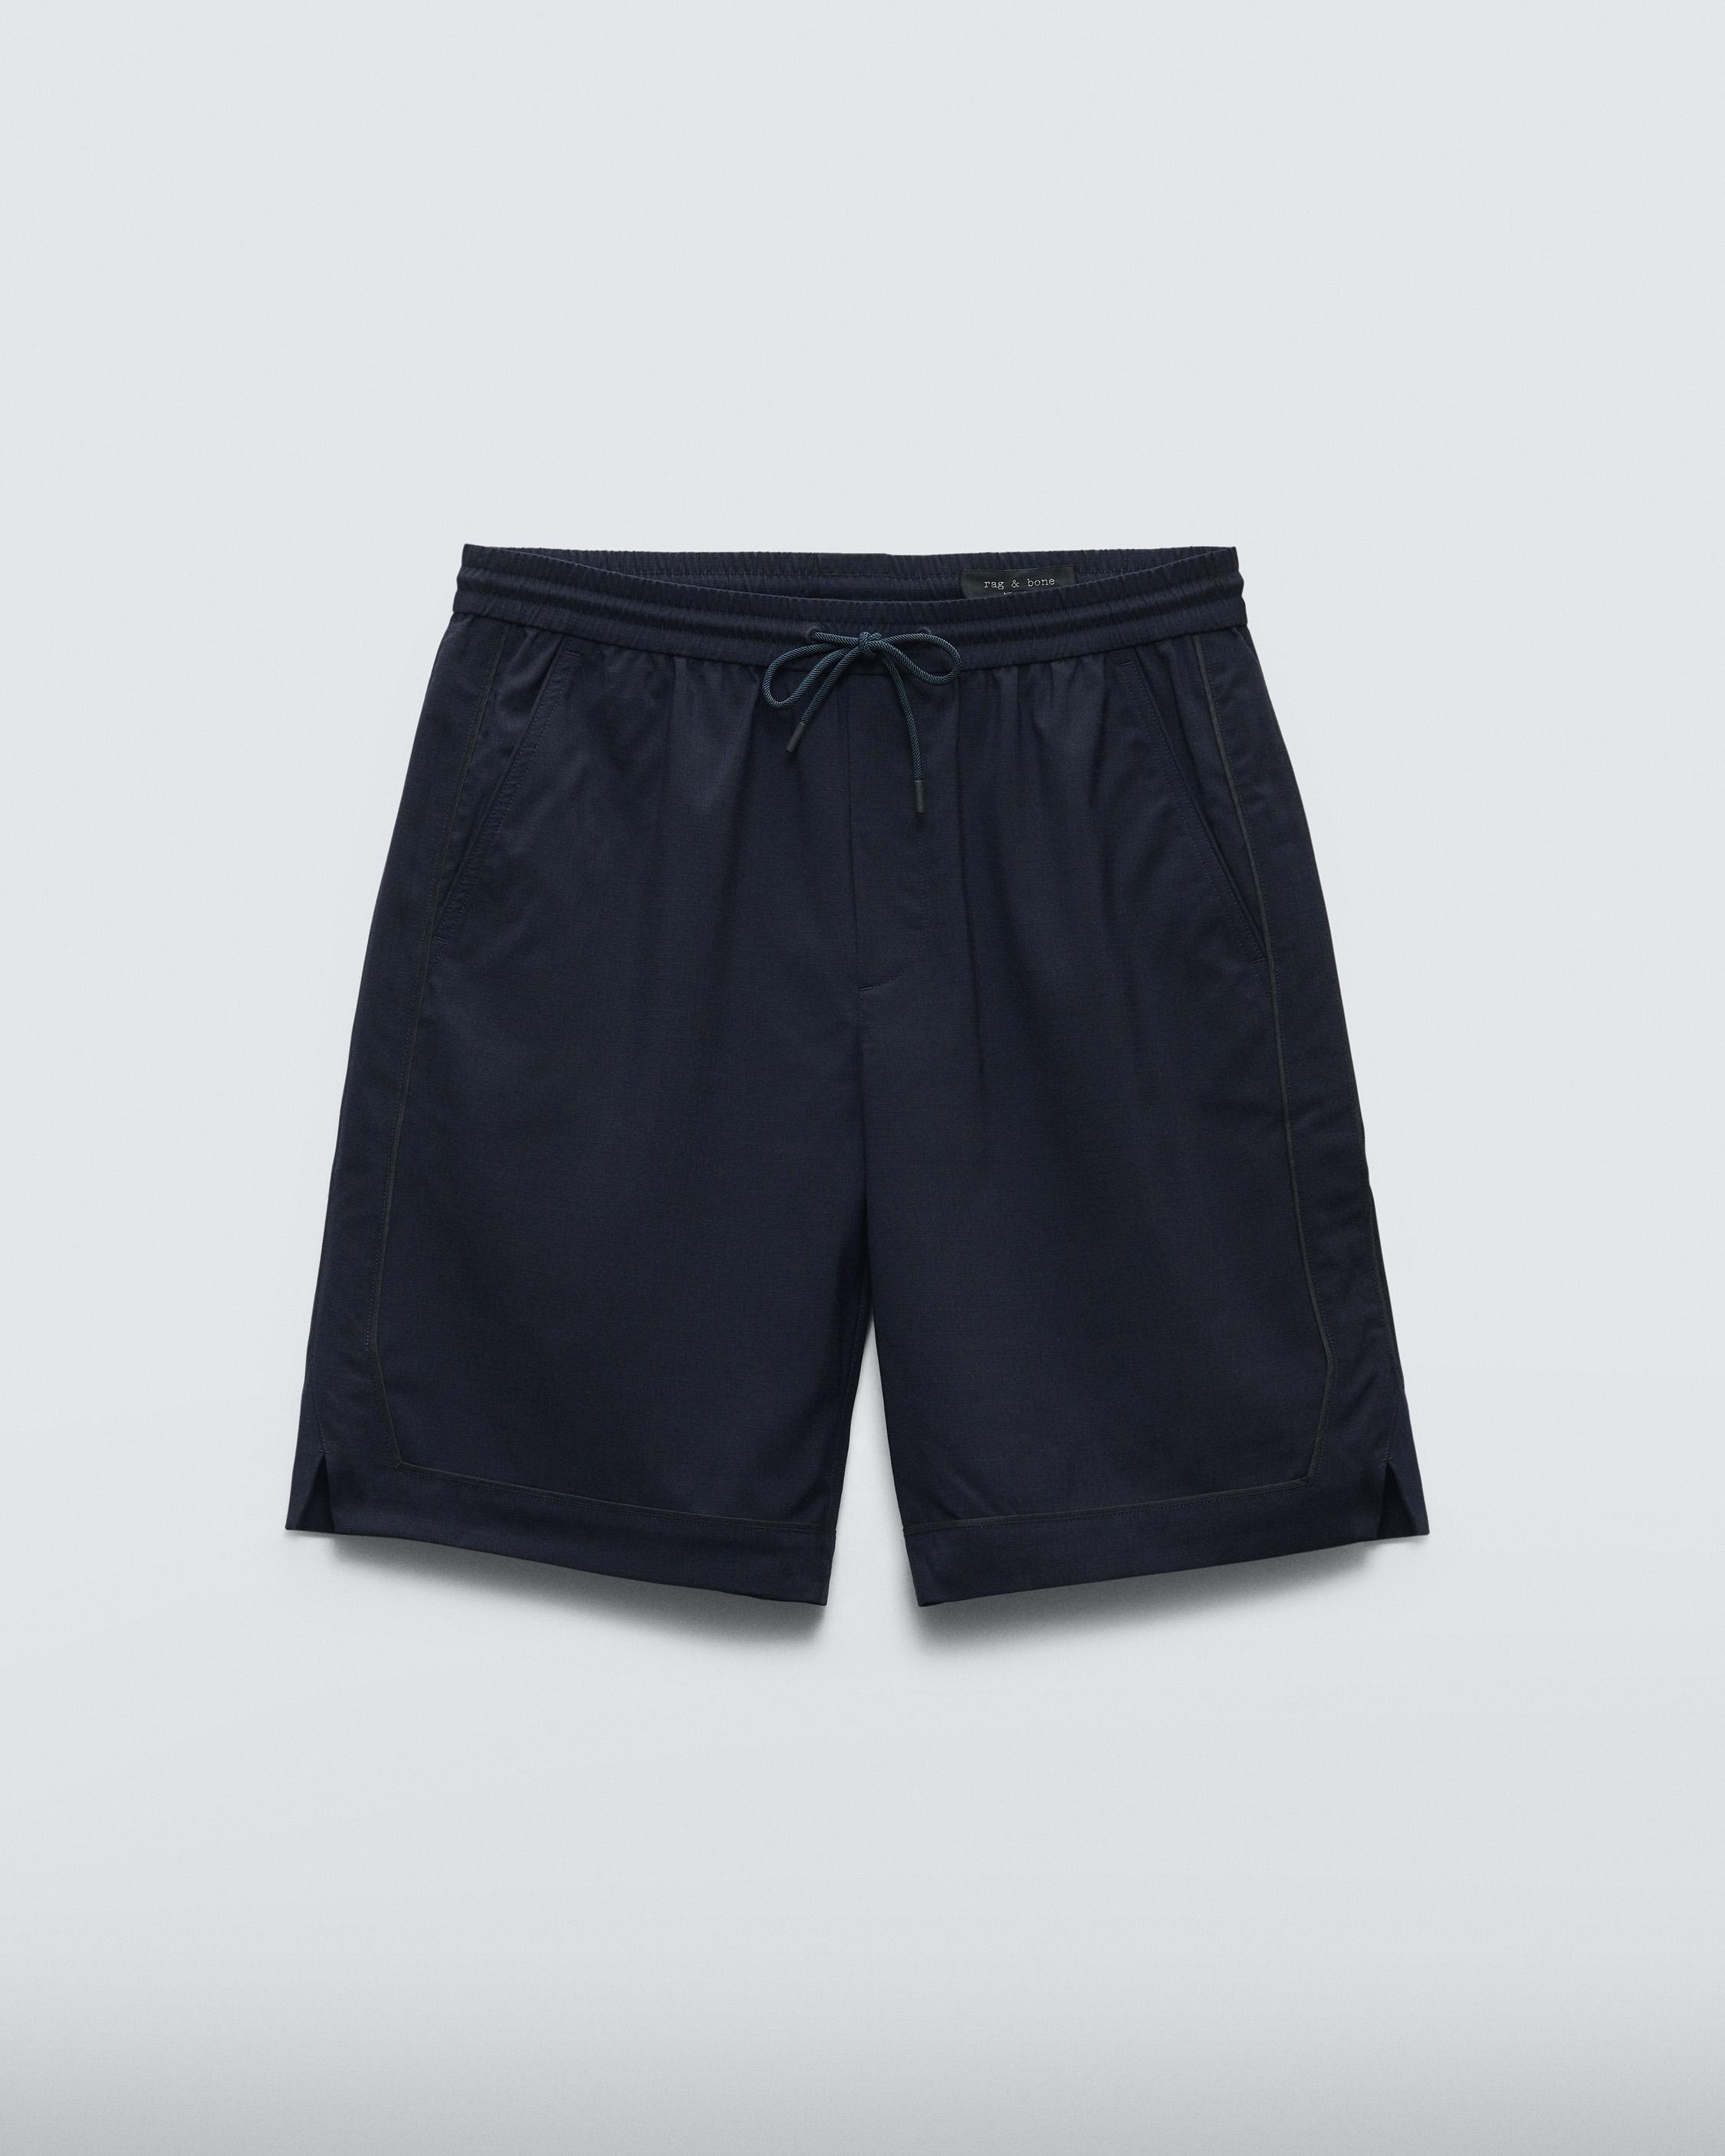 Irving Wool Short
Relaxed Fit - 1